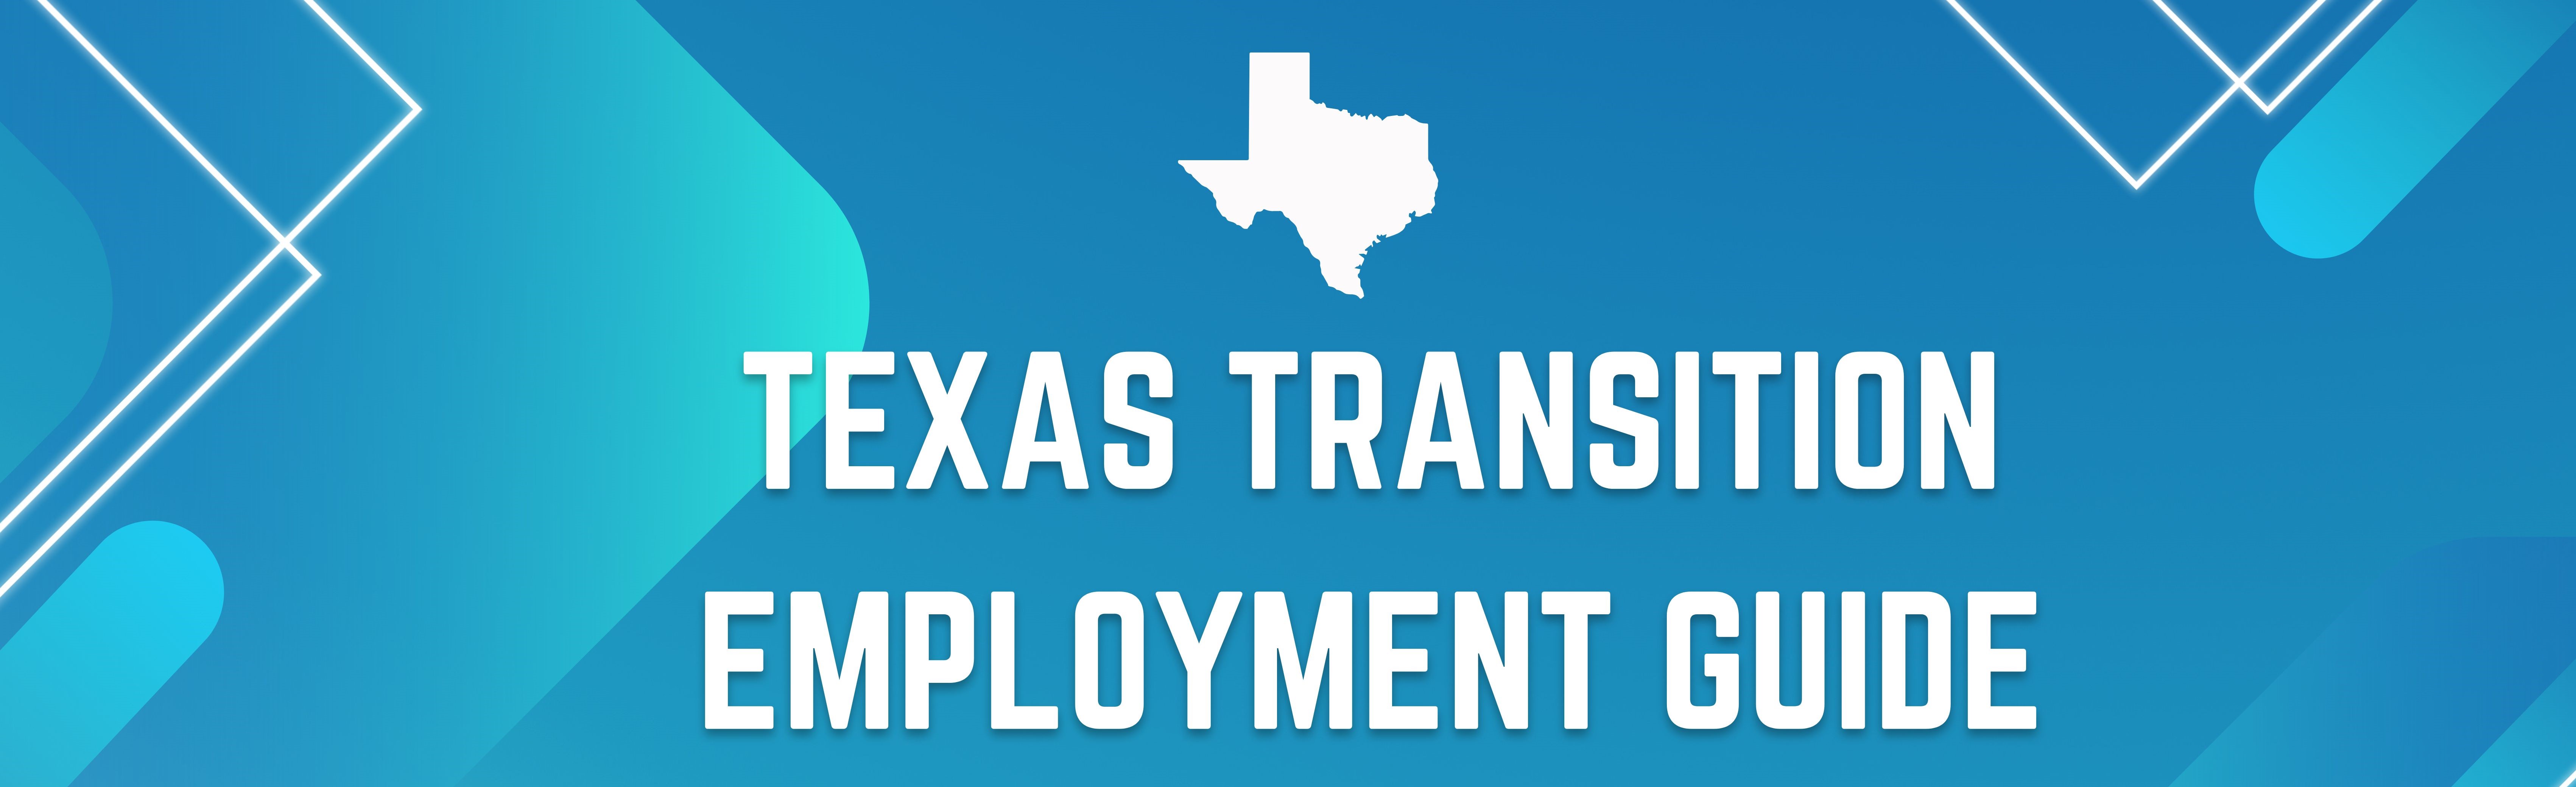 Texas Transition Employment Guide